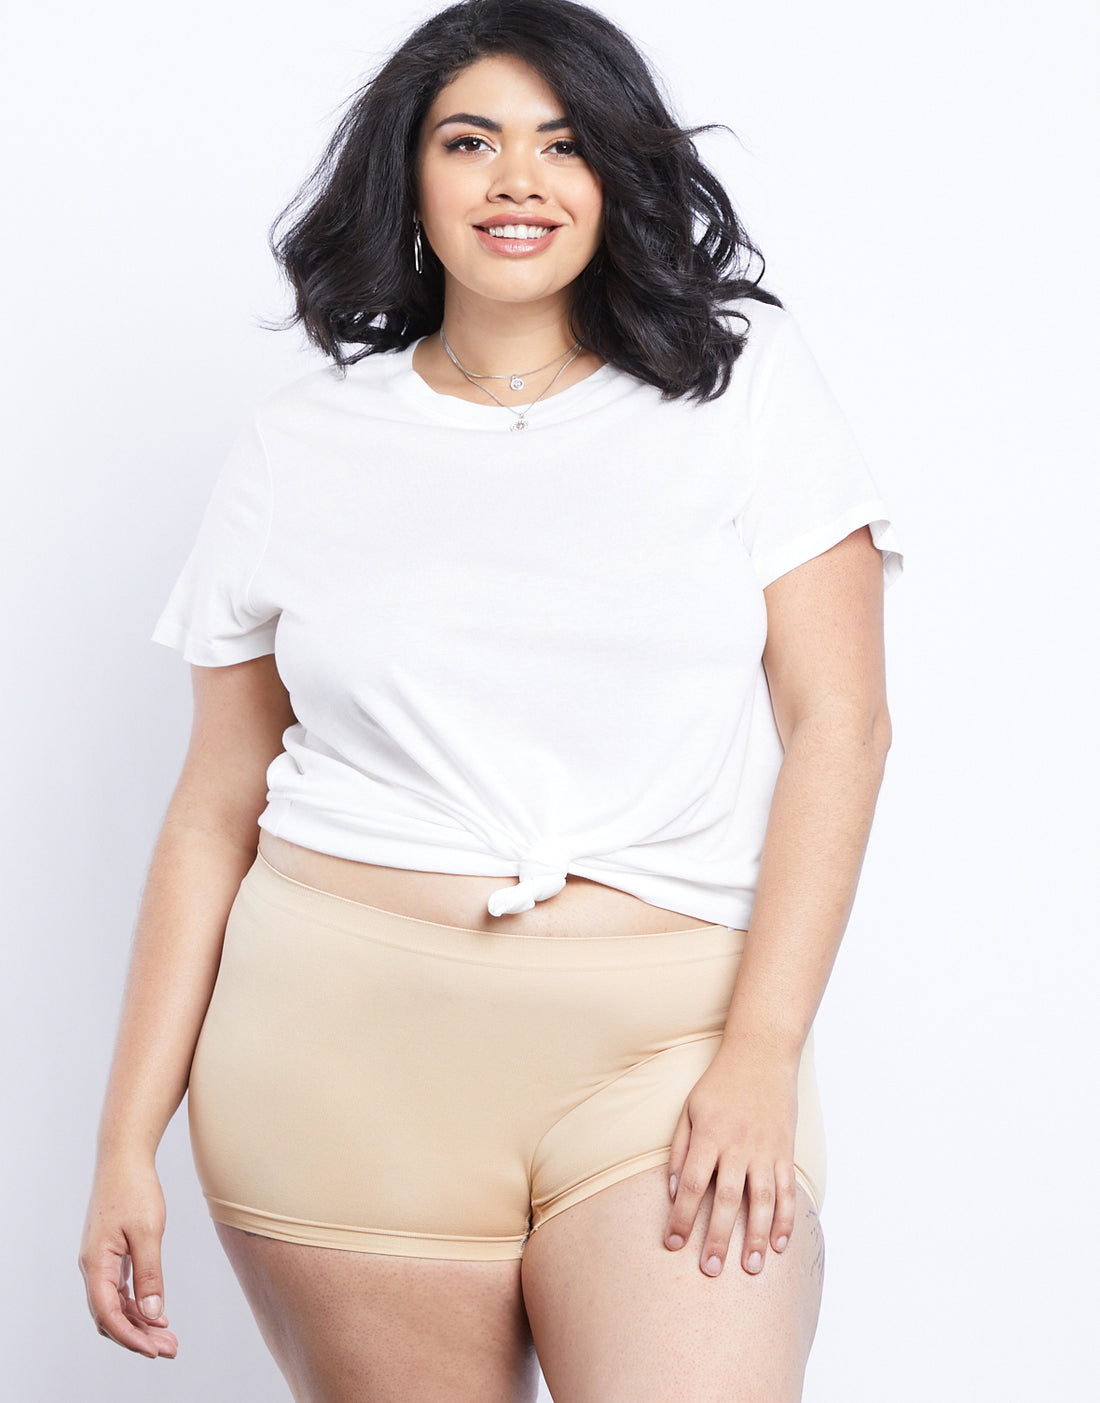 Curve Light As Air Boy Shorts Plus Size Intimates Nude Plus Size One Size -2020AVE